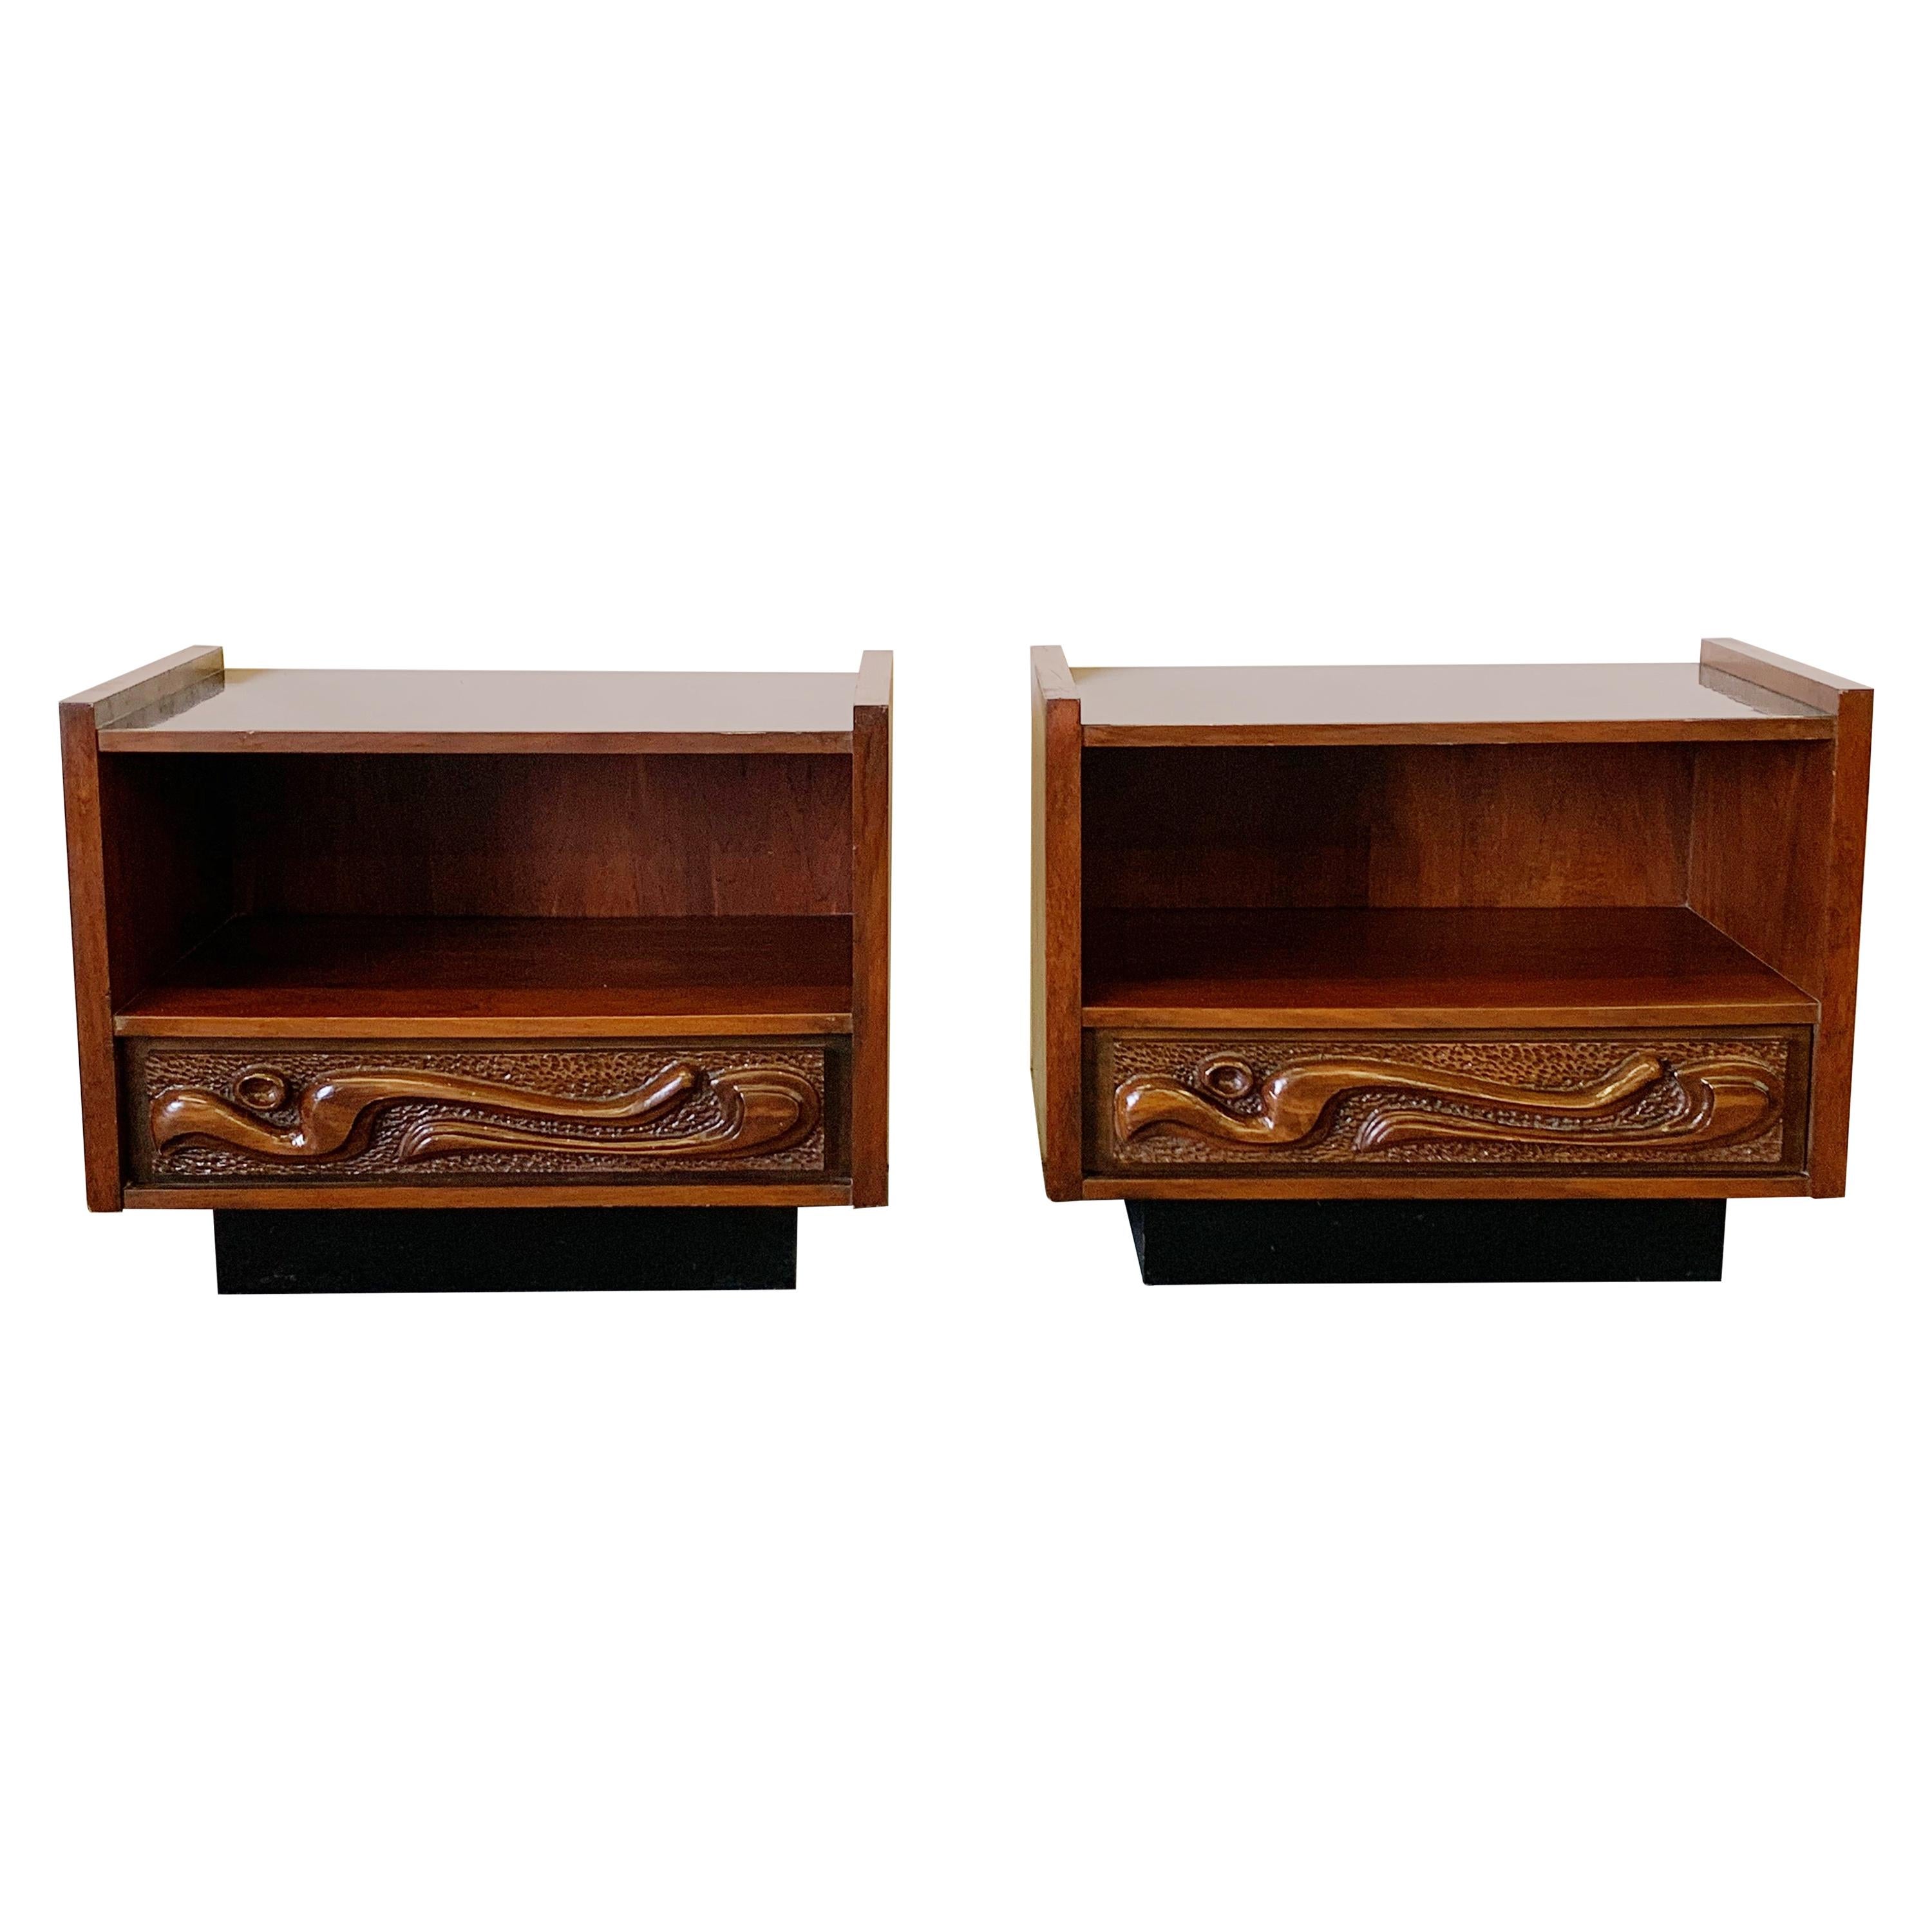 Pair of Oceanic Sculpted Walnut Nightstands by Pulaski Furniture Co., circa 1969